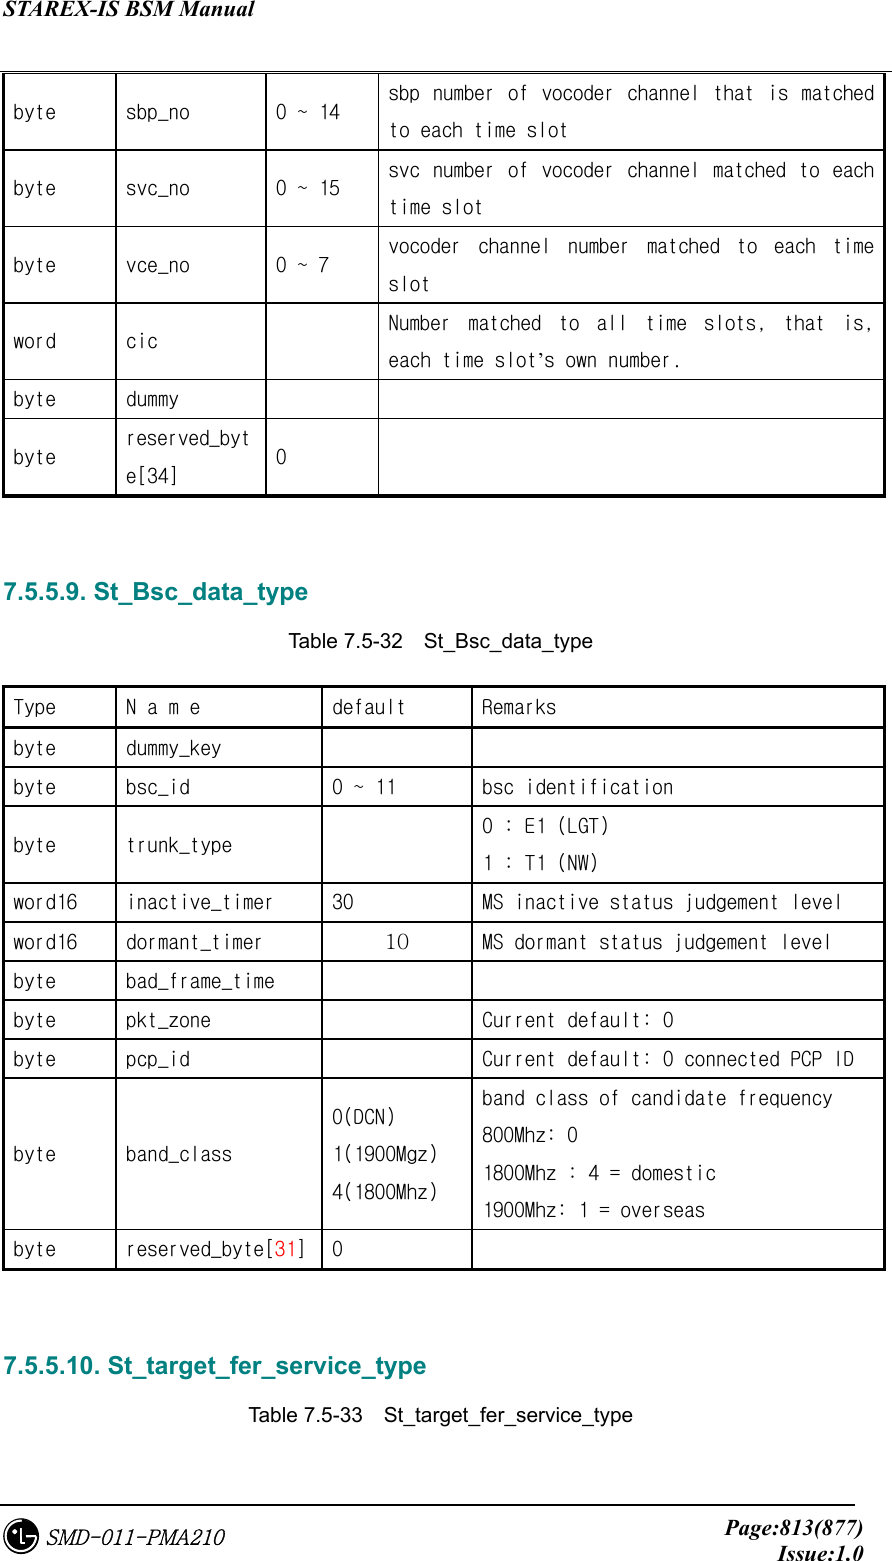 STAREX-IS BSM Manual     Page:813(877)Issue:1.0SMD-011-PMA210 byte  sbp_no  0 ~ 14  sbp  number  of  vocoder  channel  that is  matched to each time slot byte  svc_no  0 ~ 15  svc  number  of  vocoder  channel  matched to  each time slot byte  vce_no  0 ~ 7   vocoder  channel  number  matched  to  each  time slot word  cic    Number  matched  to  all  time  slots,  that  is, each time slot’s own number.  byte  dummy     byte  reserved_byte[34]  0     7.5.5.9. St_Bsc_data_type Table 7.5-32  St_Bsc_data_type Type  N a m e  default  Remarks  byte  dummy_key    byte  bsc_id  0 ~ 11  bsc identification byte  trunk_type    0 : E1 (LGT) 1 : T1 (NW) word16  inactive_timer  30  MS inactive status judgement level  word16  dormant_timer  10  MS dormant status judgement level  byte  bad_frame_time     byte   pkt_zone    Current default: 0  byte  pcp_id    Current default: 0 connected PCP ID byte  band_class 0(DCN) 1(1900Mgz) 4(1800Mhz) band class of candidate frequency  800Mhz: 0 1800Mhz : 4 = domestic  1900Mhz: 1 = overseas  byte  reserved_byte[31]  0     7.5.5.10. St_target_fer_service_type   Table 7.5-33  St_target_fer_service_type 